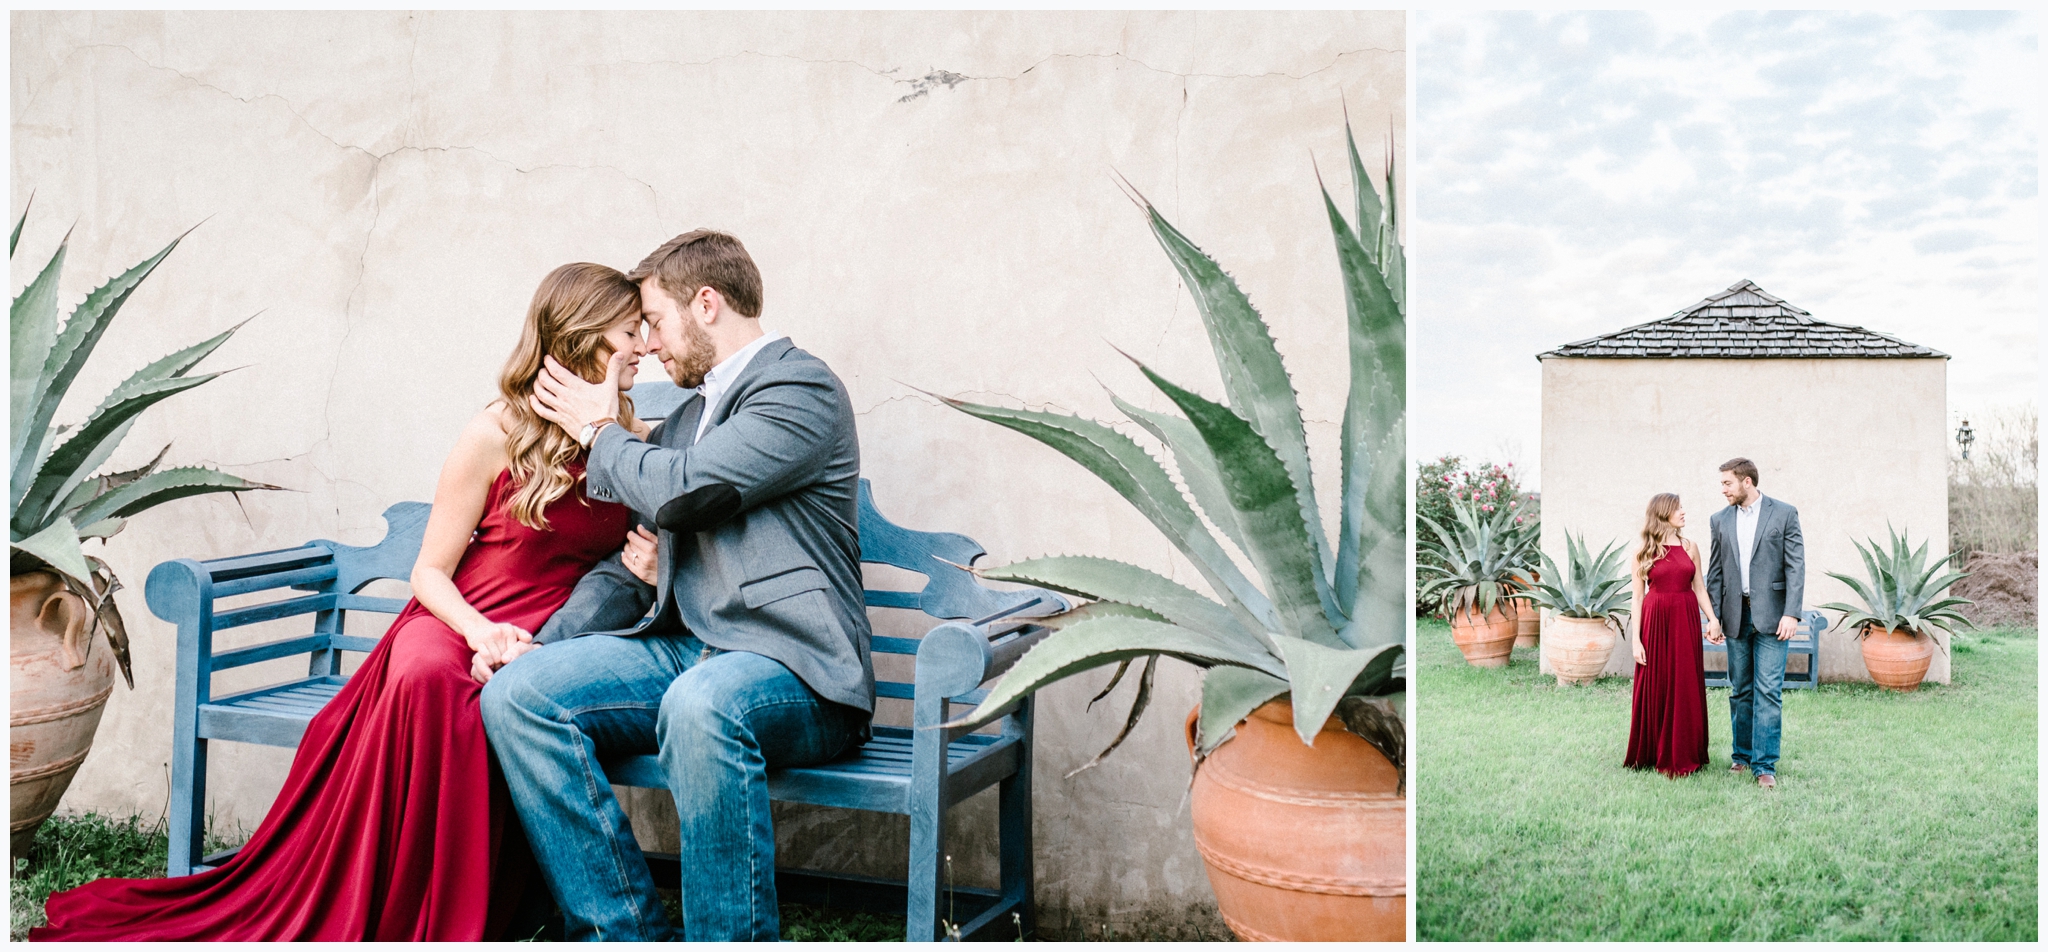 joslyn-holtfort-photography-engagement-session-le-san-michele-buda-texas_0012